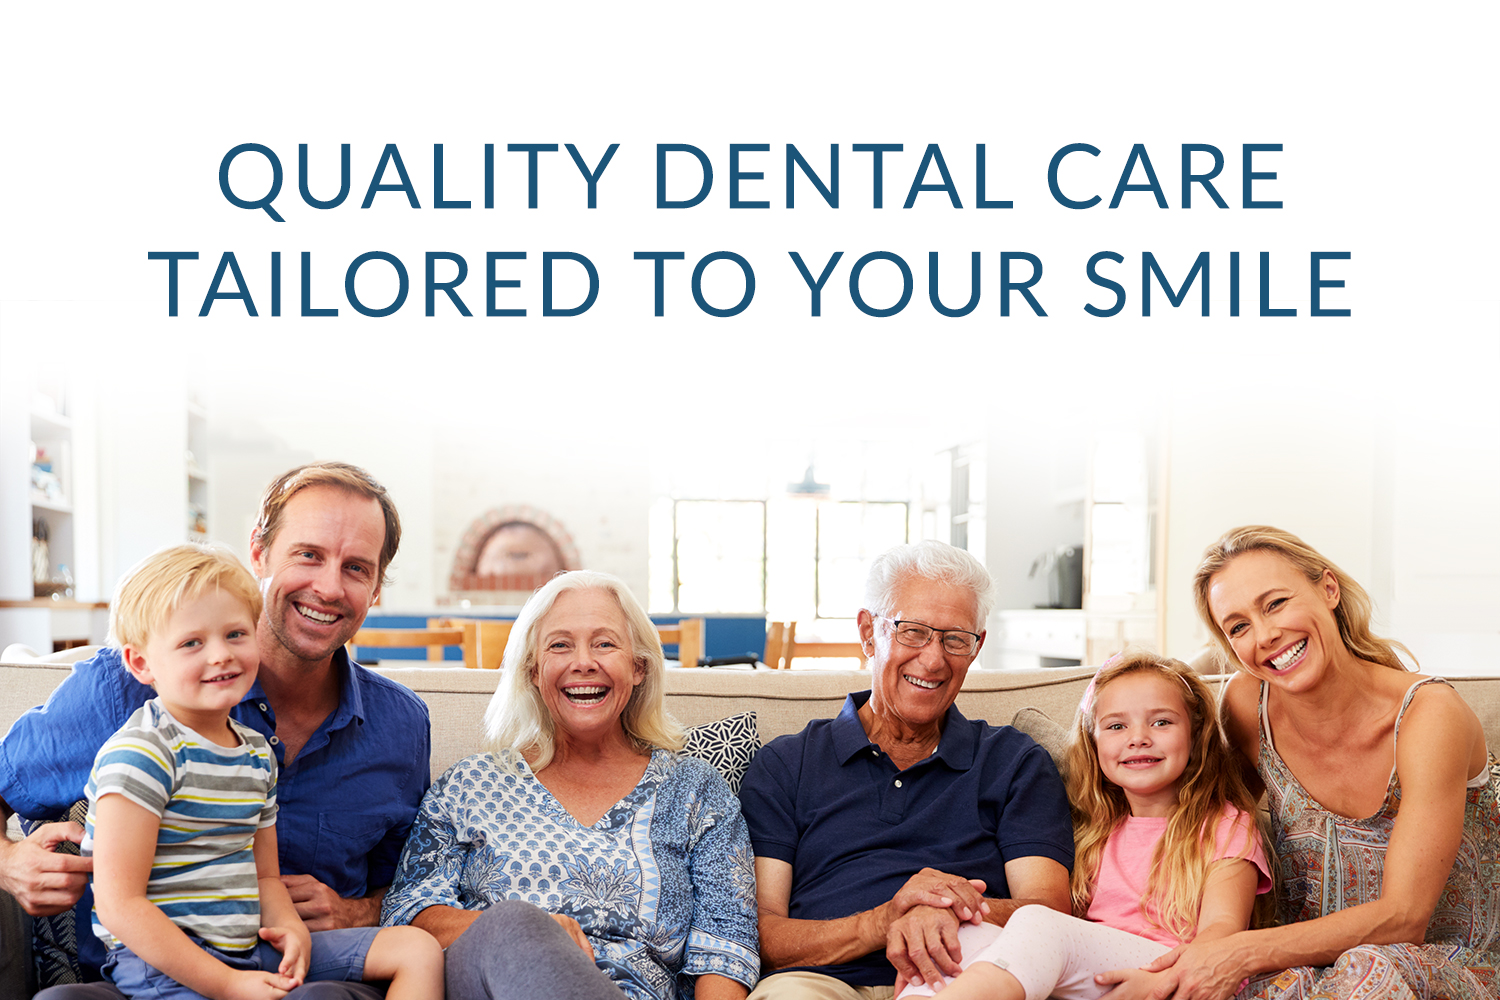 Quality Dental Care Tailored to Your Smile